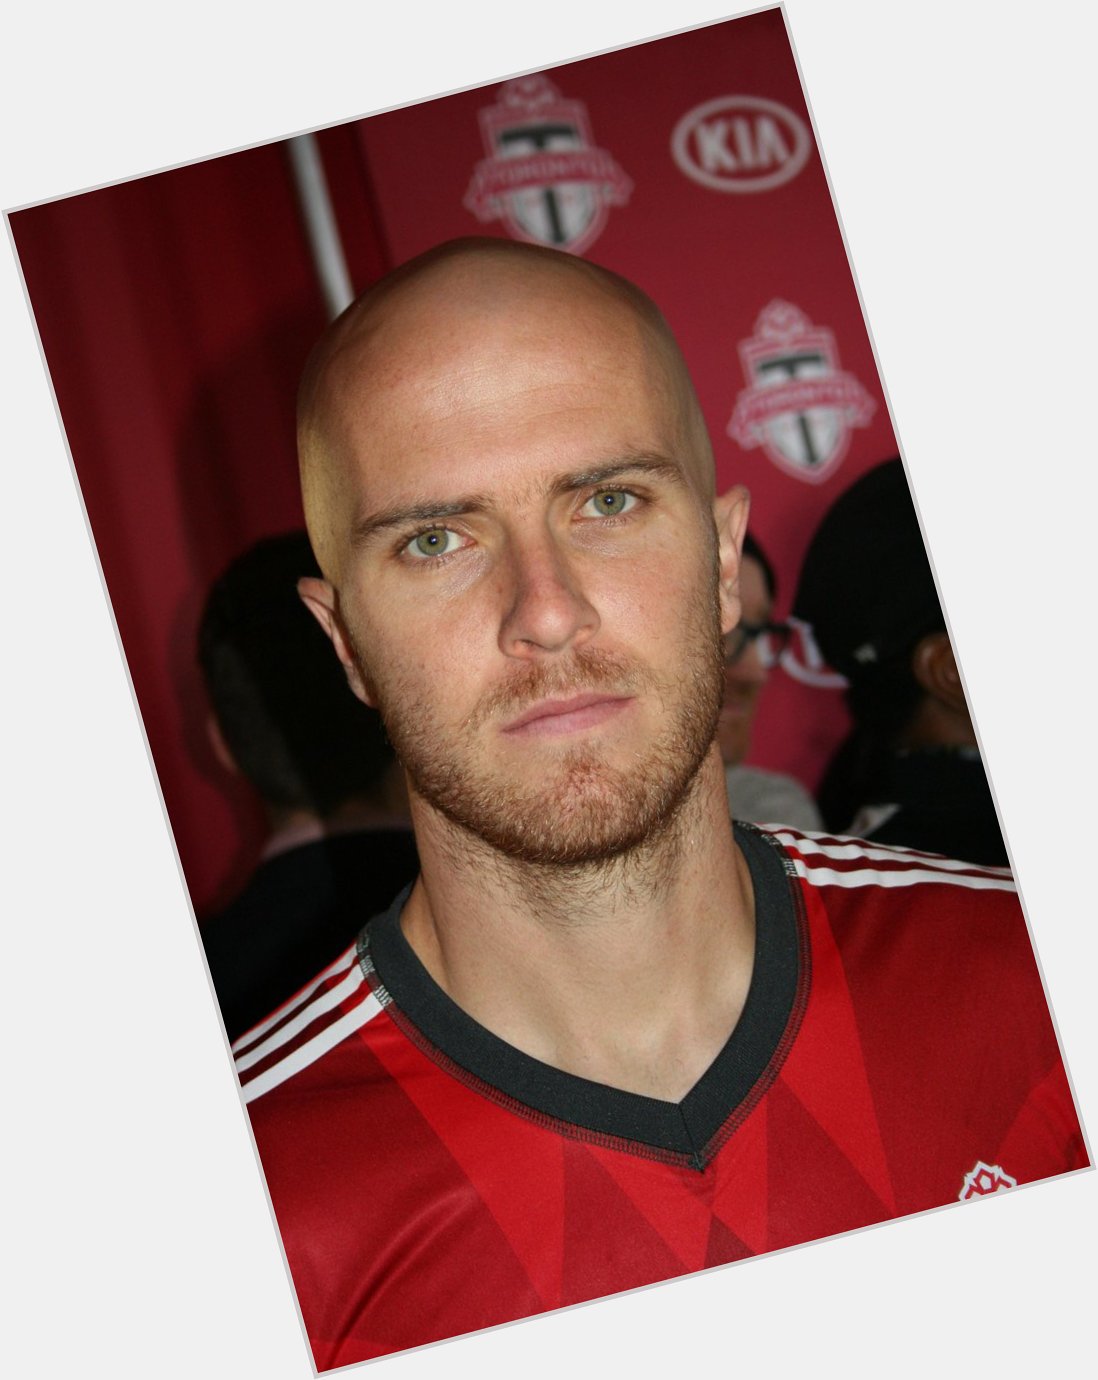 A Happy 28th Birthday to Captain Michael Bradley. Many Happy Returns Michael. See you back on the field soon! 